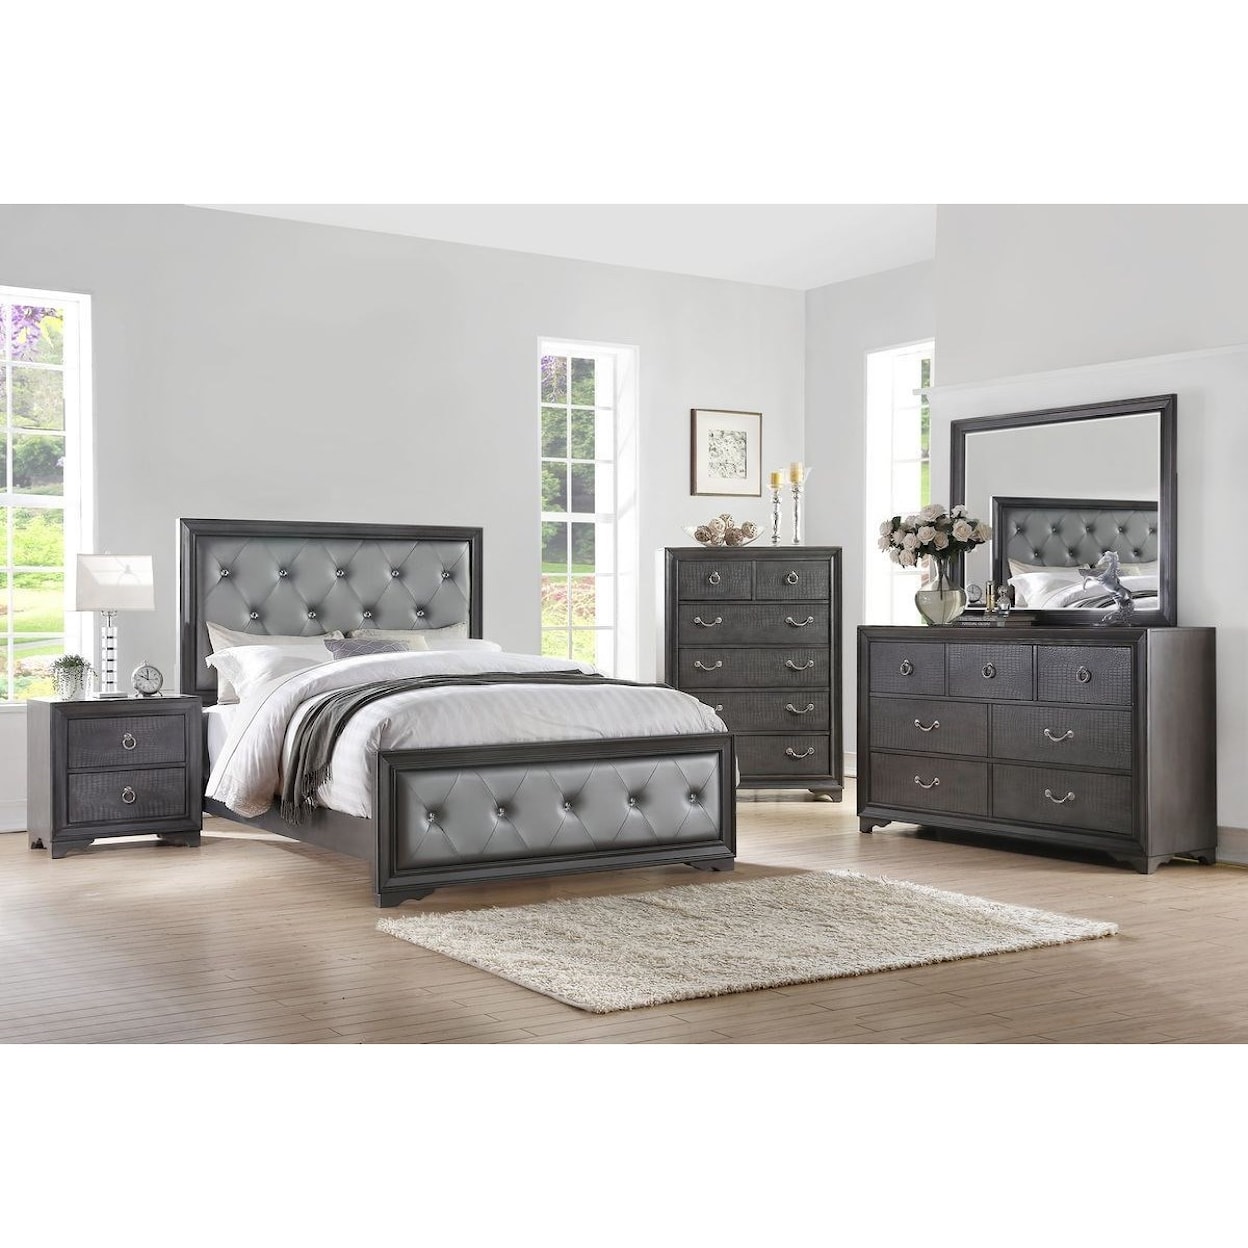 Avalon Furniture Rodeo Drive Queen Bedroom Group